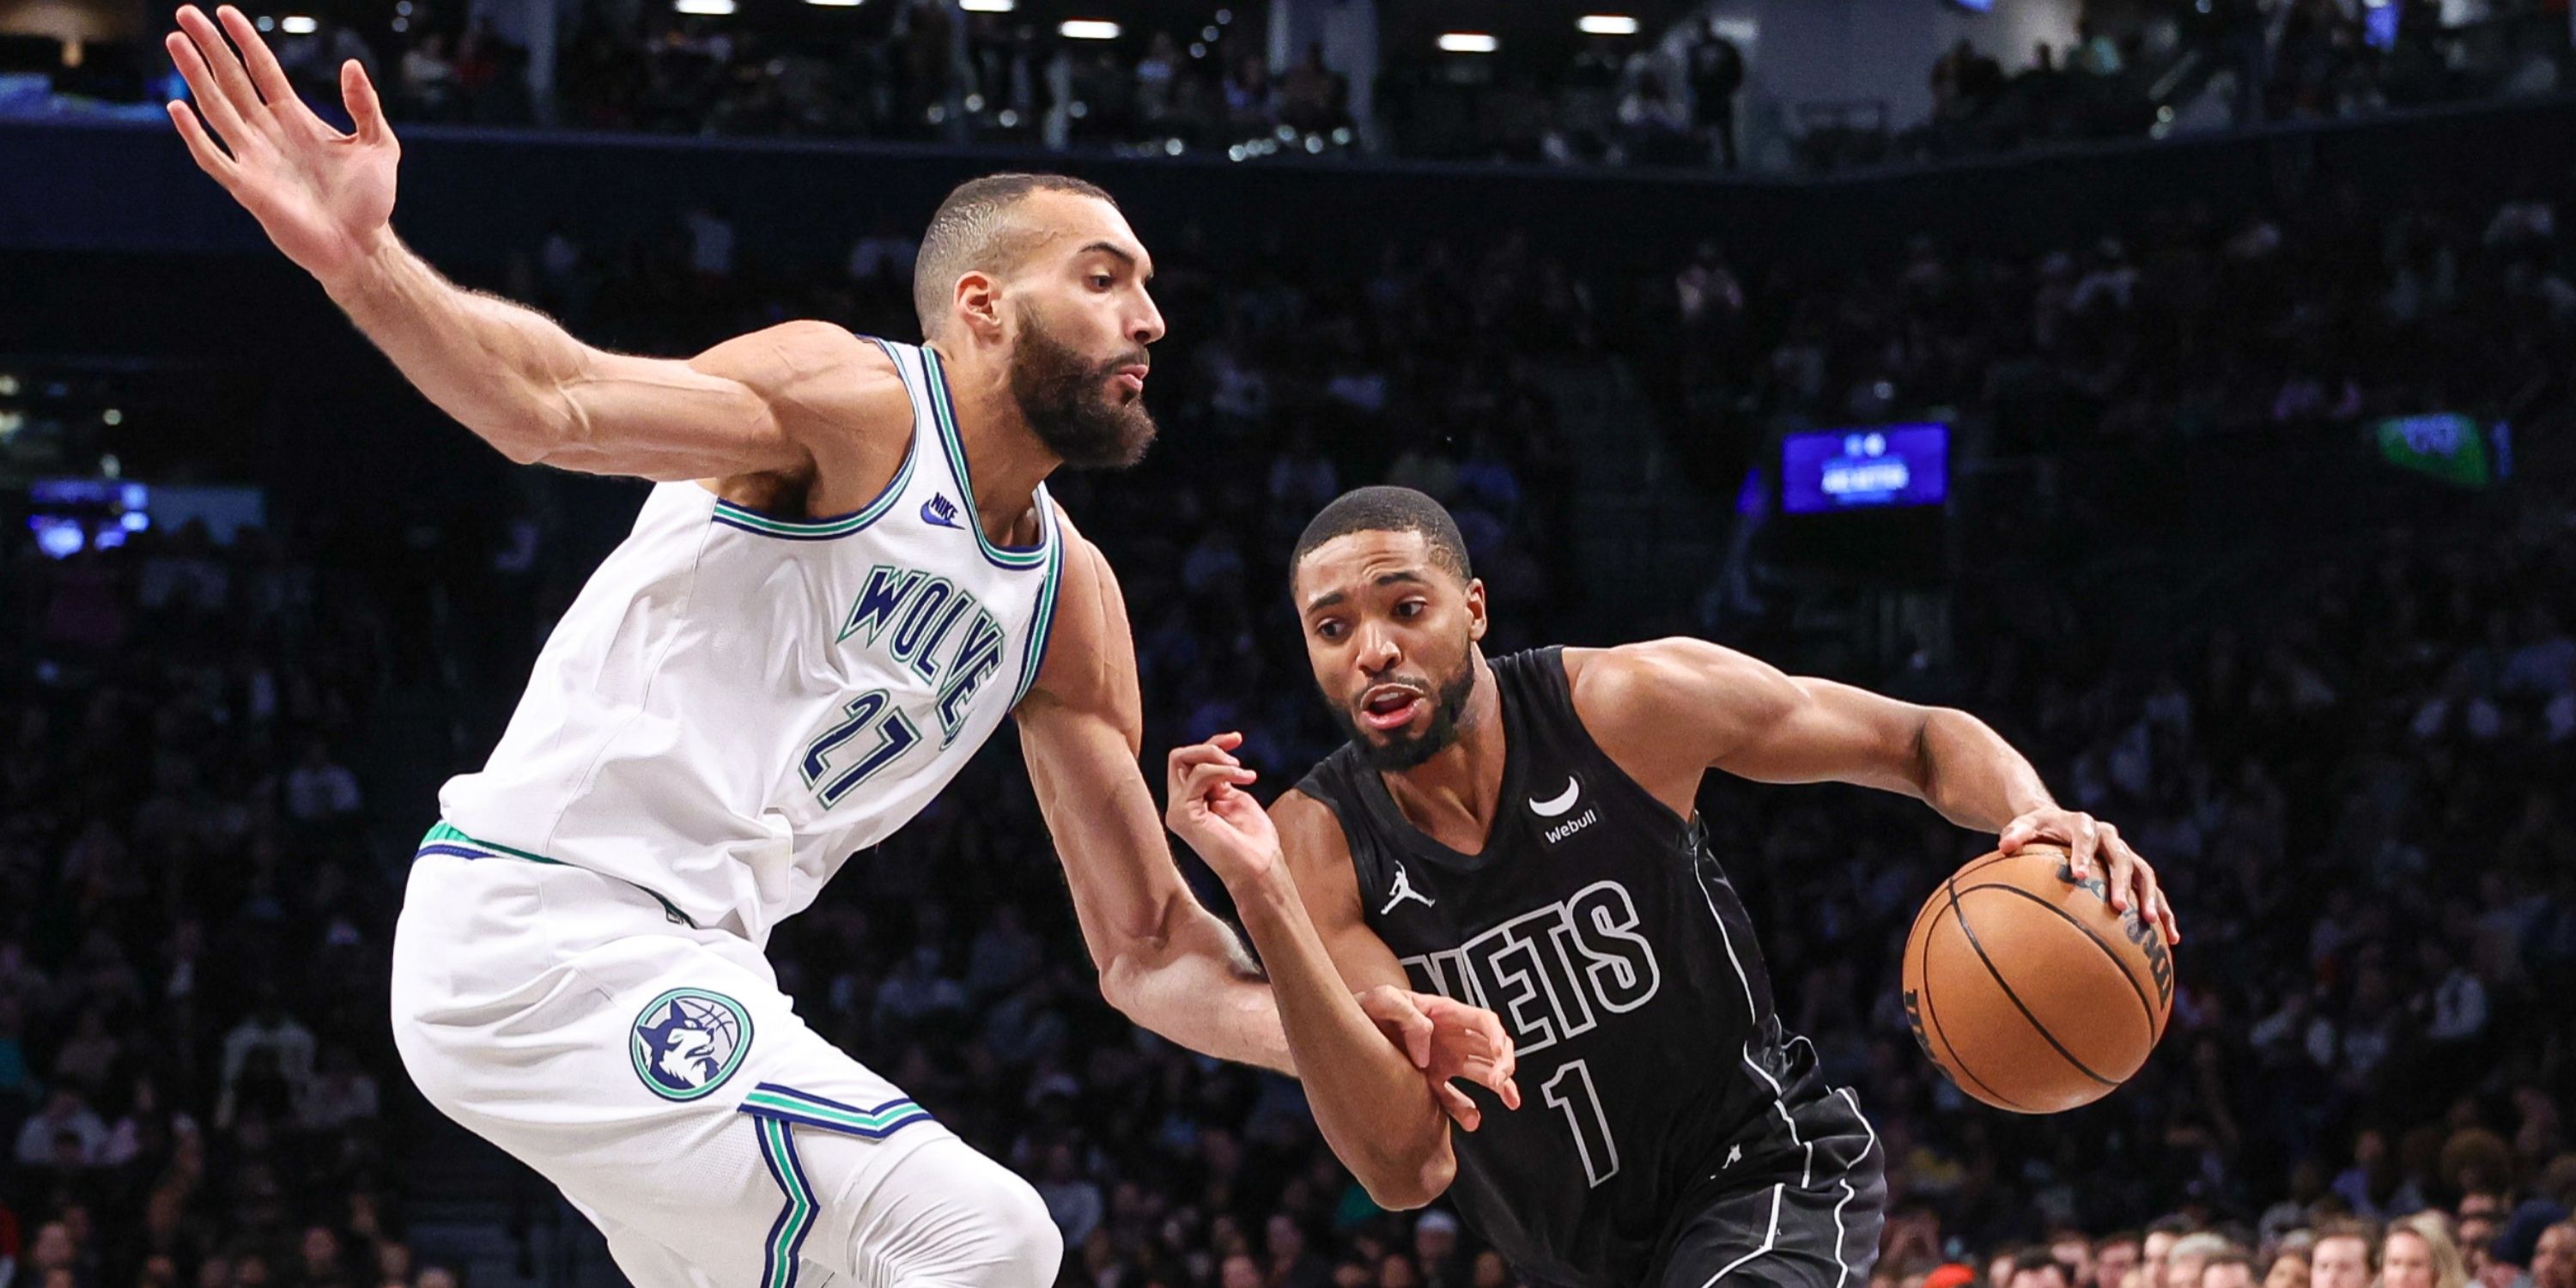 Nets vs. Timberwolves: preview and picks before tipoff